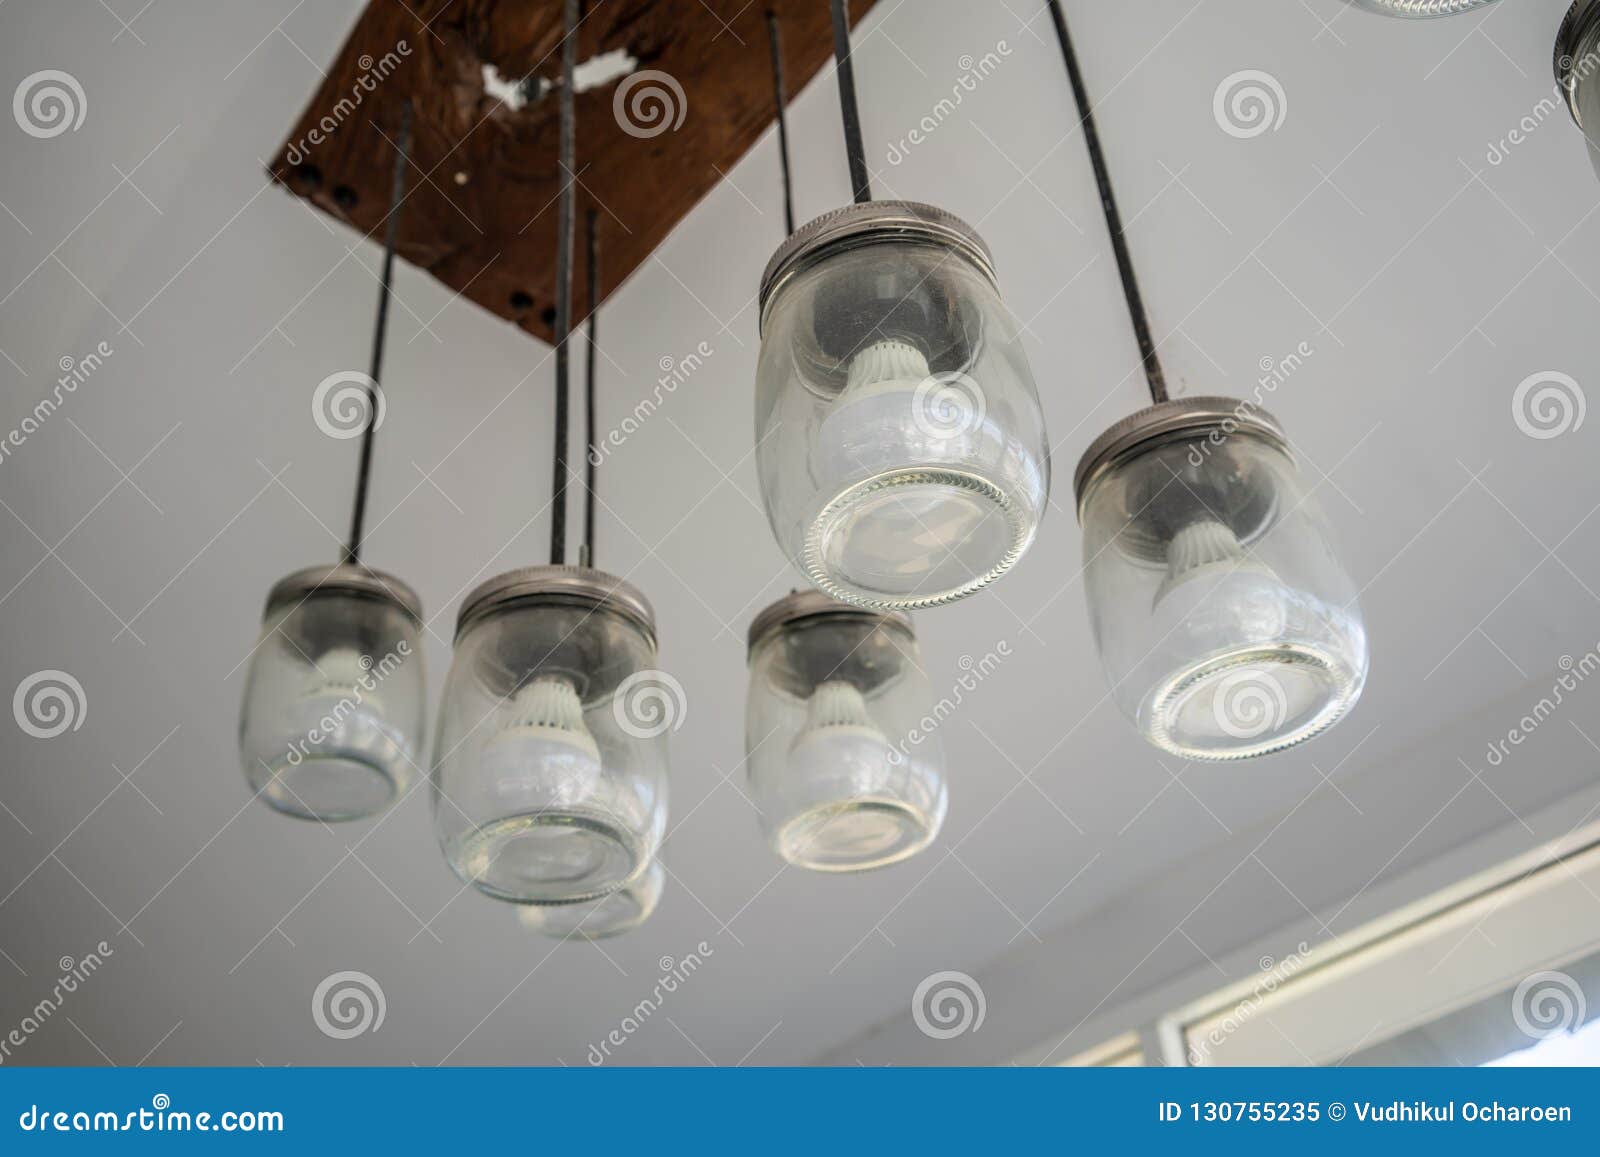 Diy Lamb Design With Glass Jar And Led Light Bulb Hanging From A